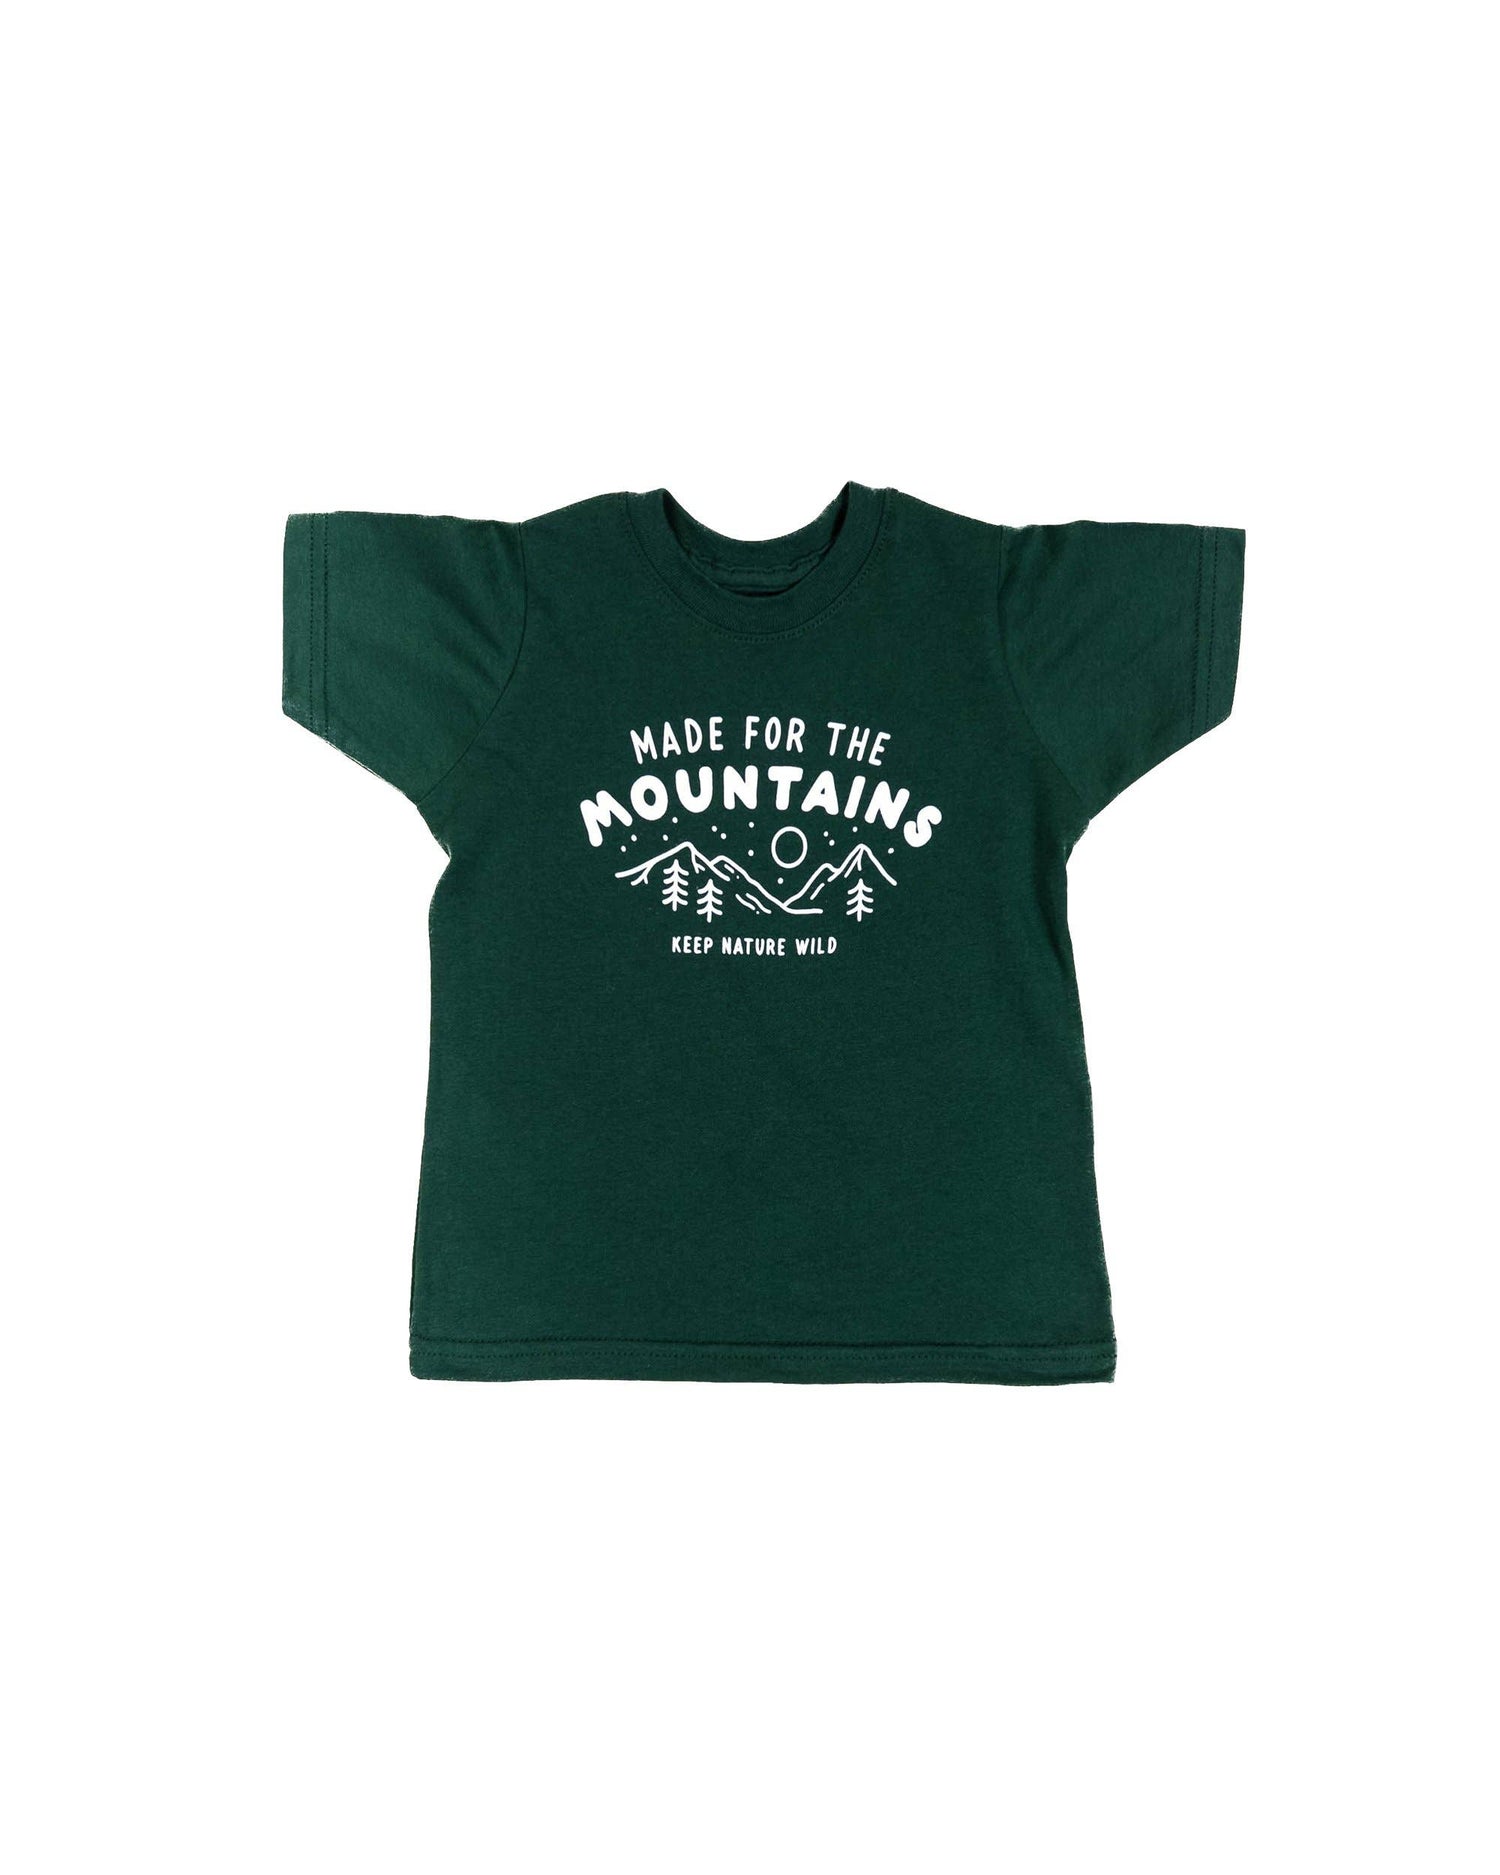 Made for the Mountains green toddler shirt by Keep Nature Wild